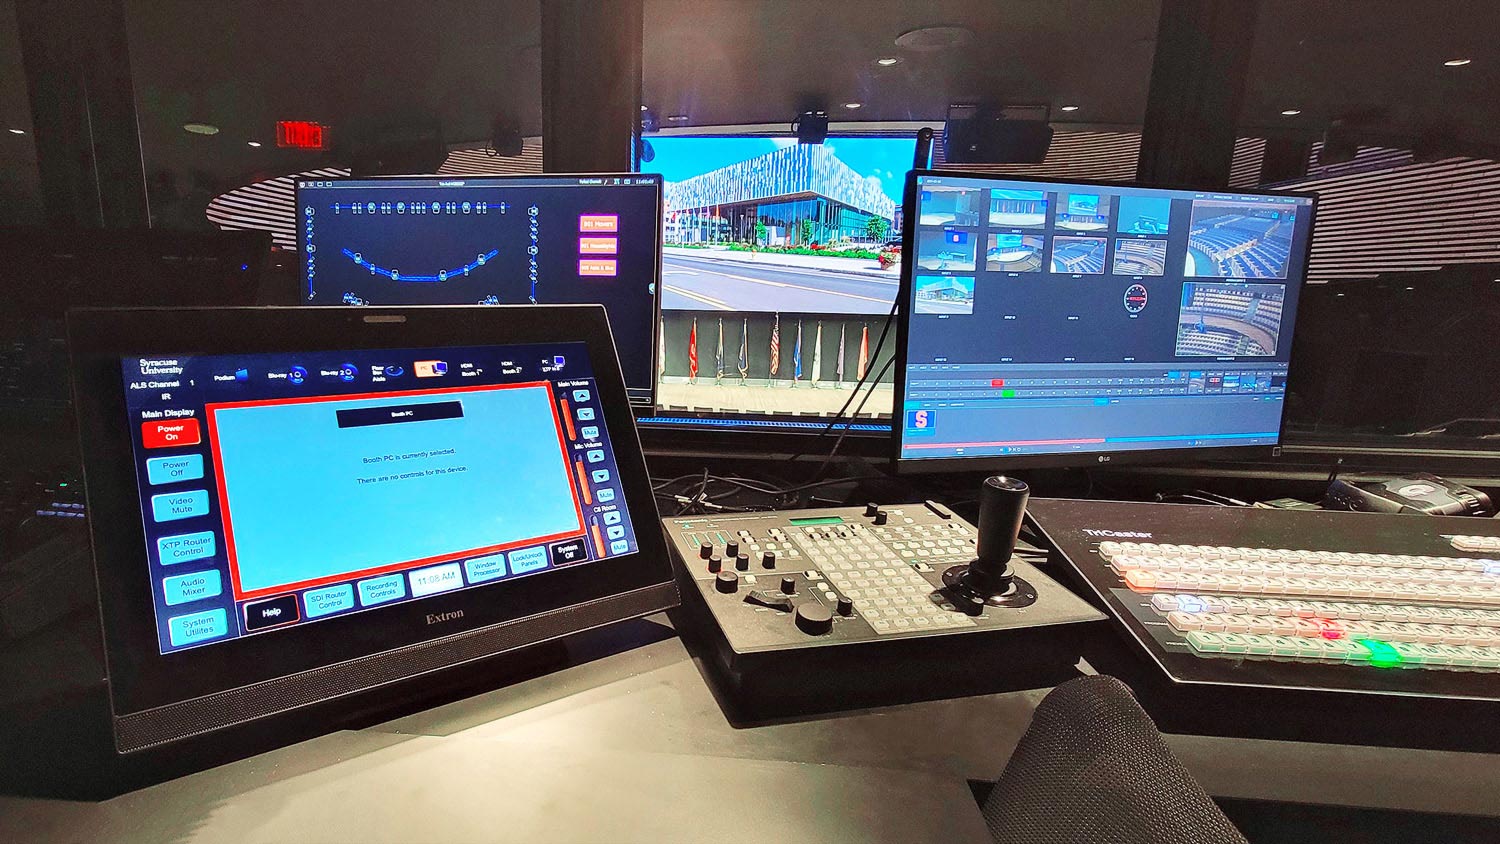 The support staff uses an Extron TLP Pro 1725TG 17” Tabletop TouchLink Pro Touchpanel to operate the AV system for the presenter.